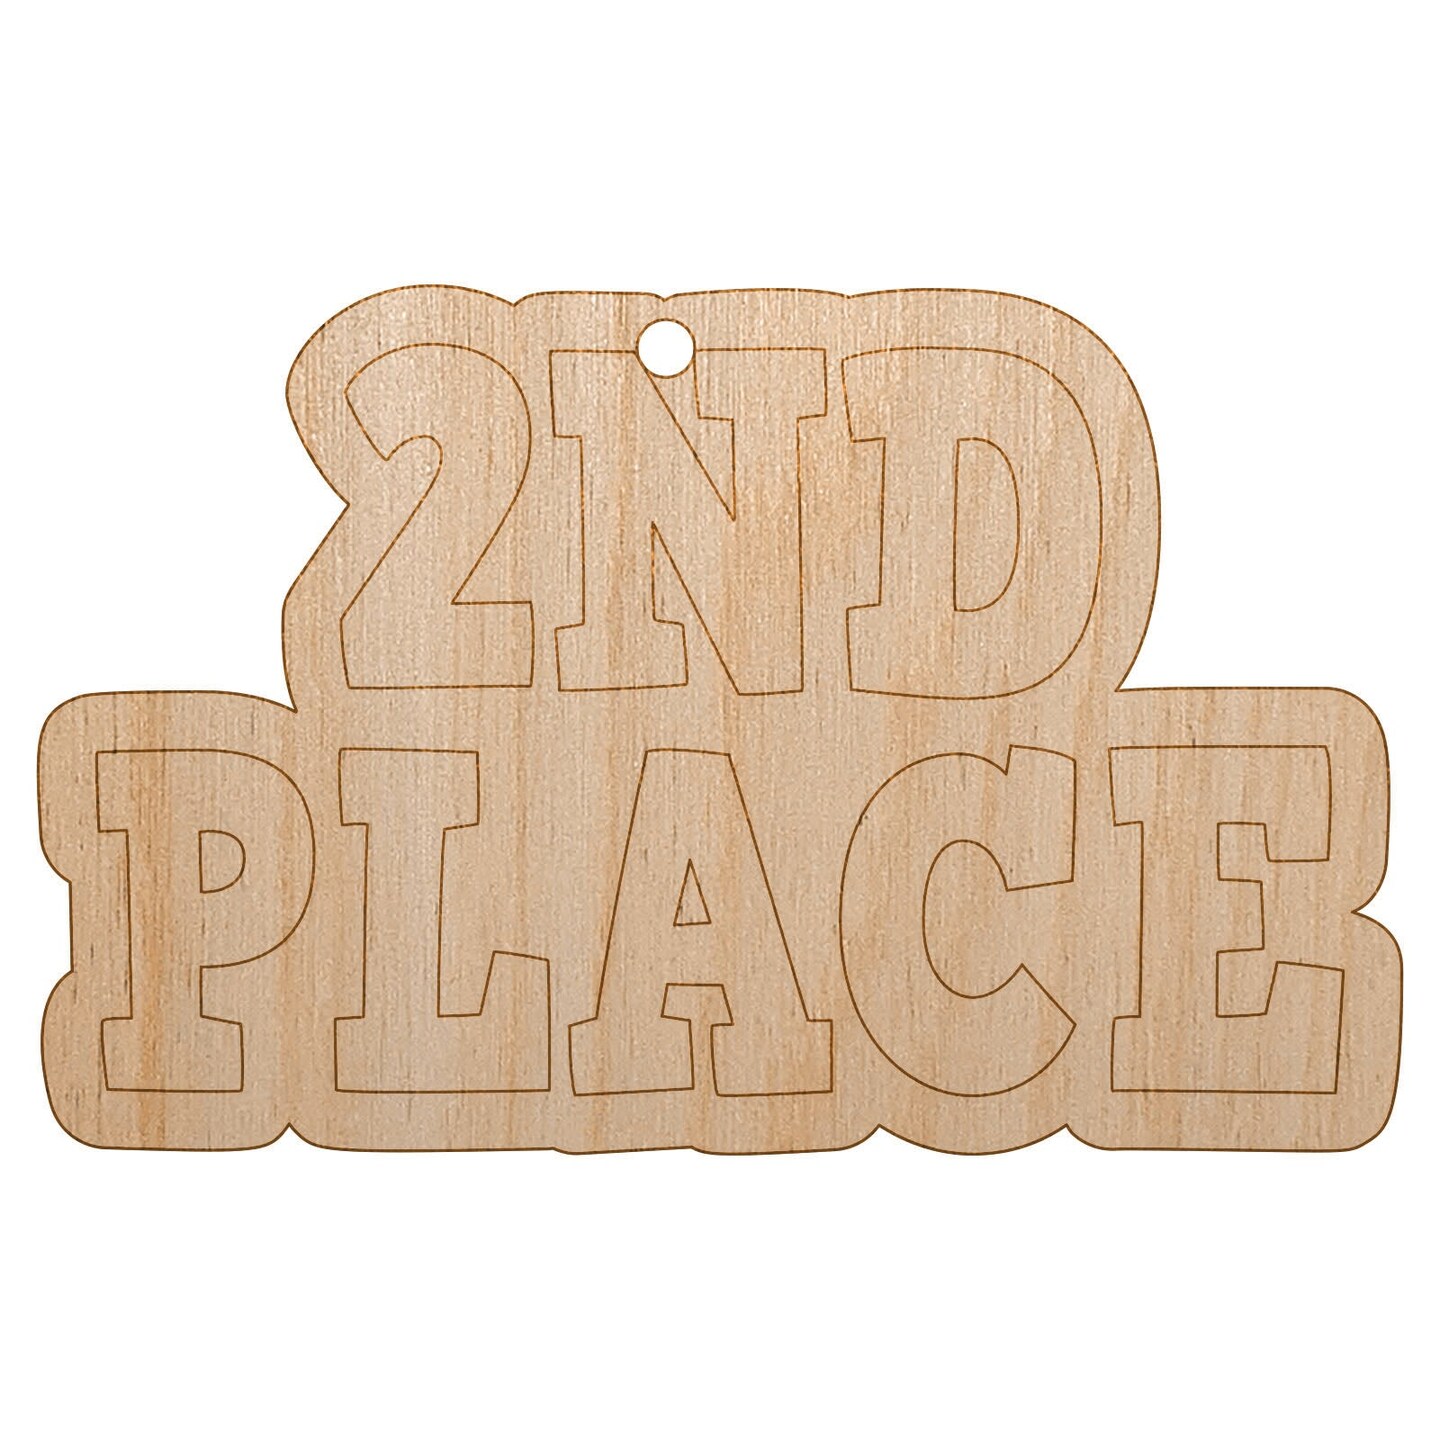 Second 2nd Place Fun Text Unfinished Craft Wood Holiday Christmas Tree DIY Pre-Drilled Ornament